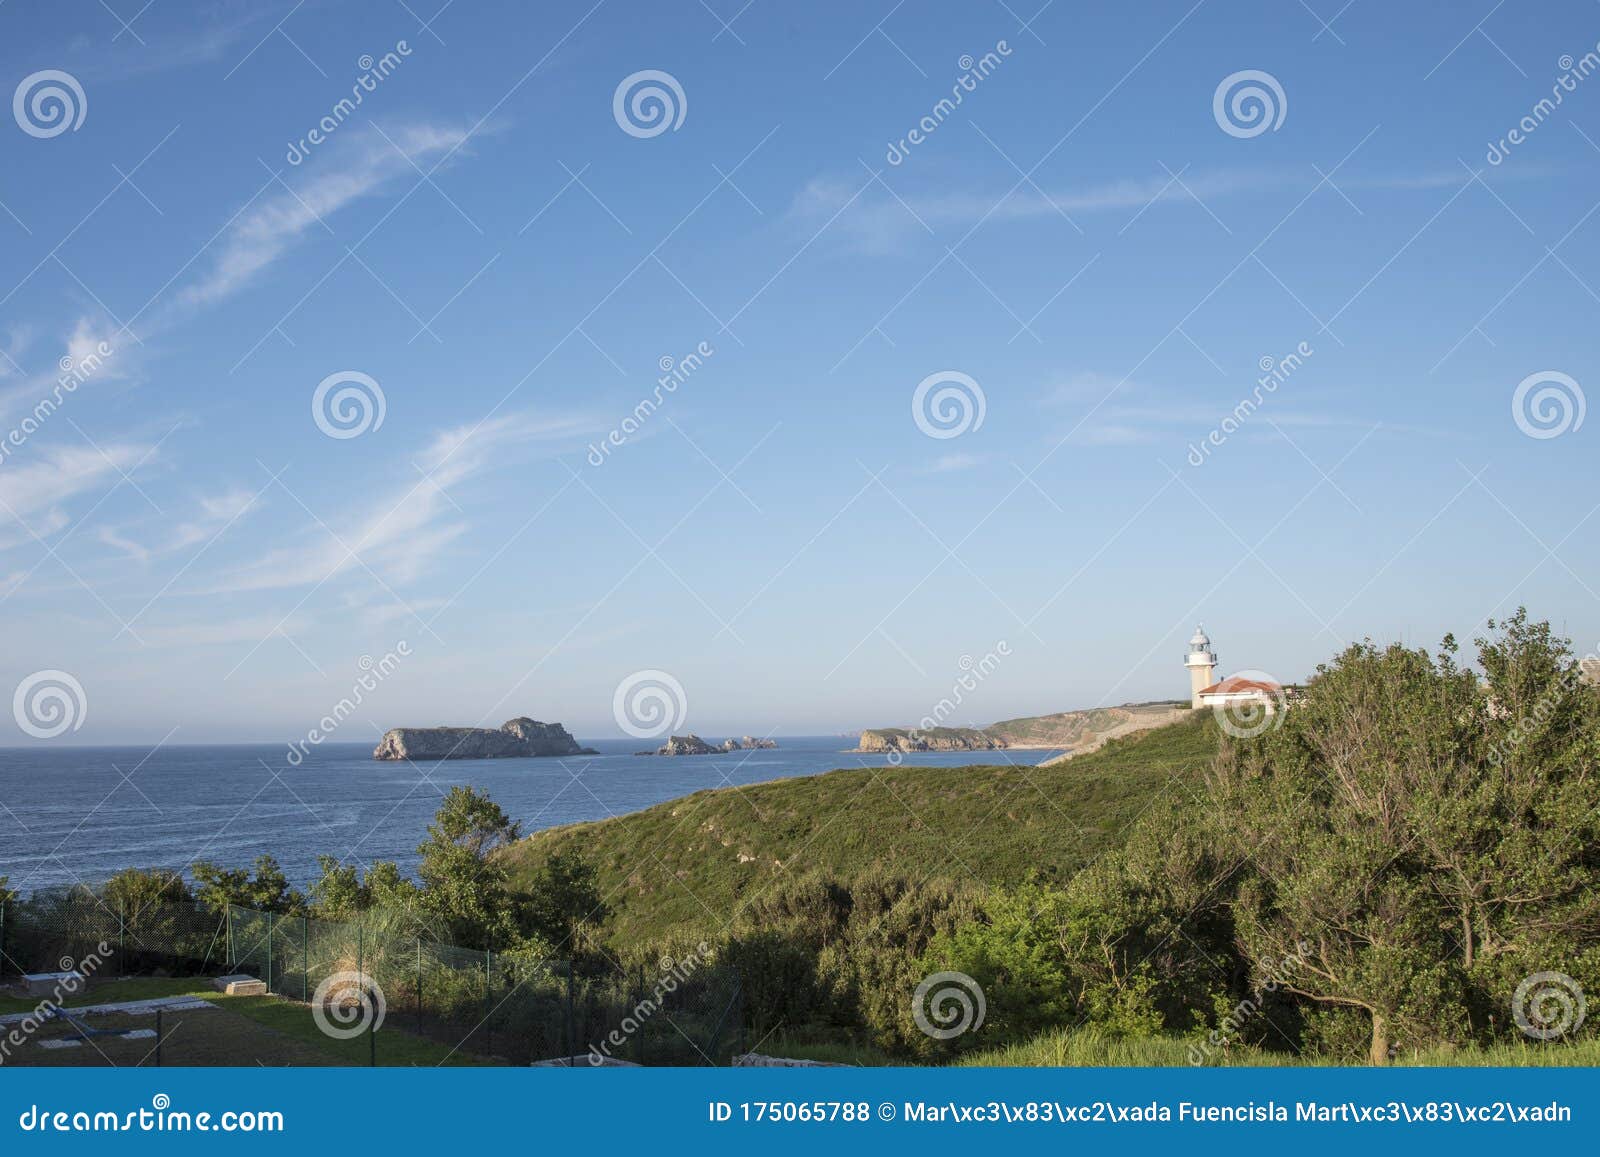 views of the lighthouse of punta del torco de afuera in suances, cantabria, spain.